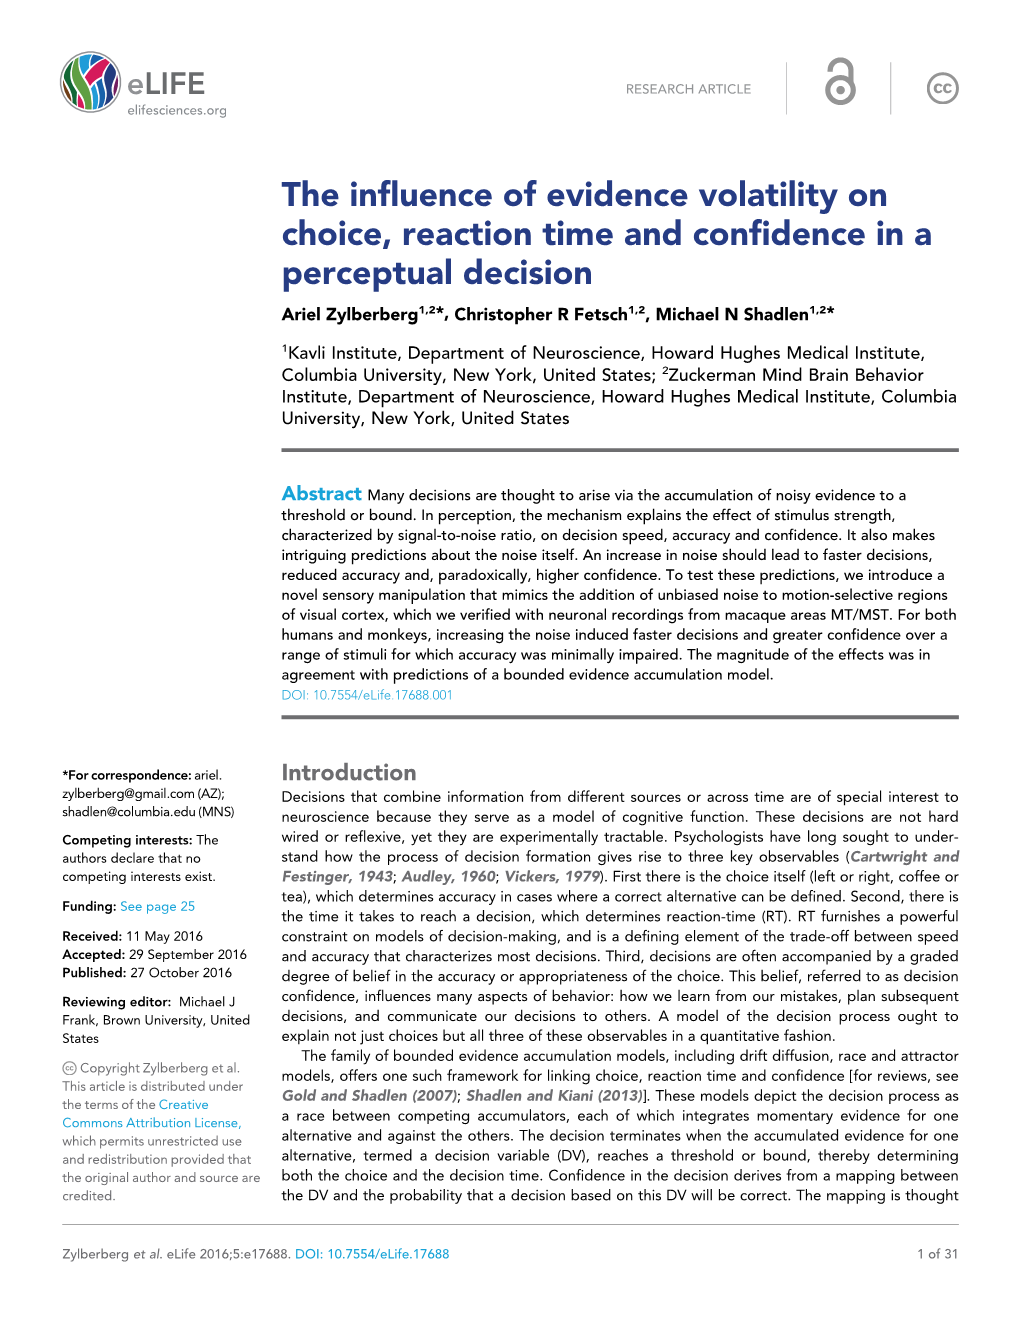 The Influence of Evidence Volatility on Choice, Reaction Time And